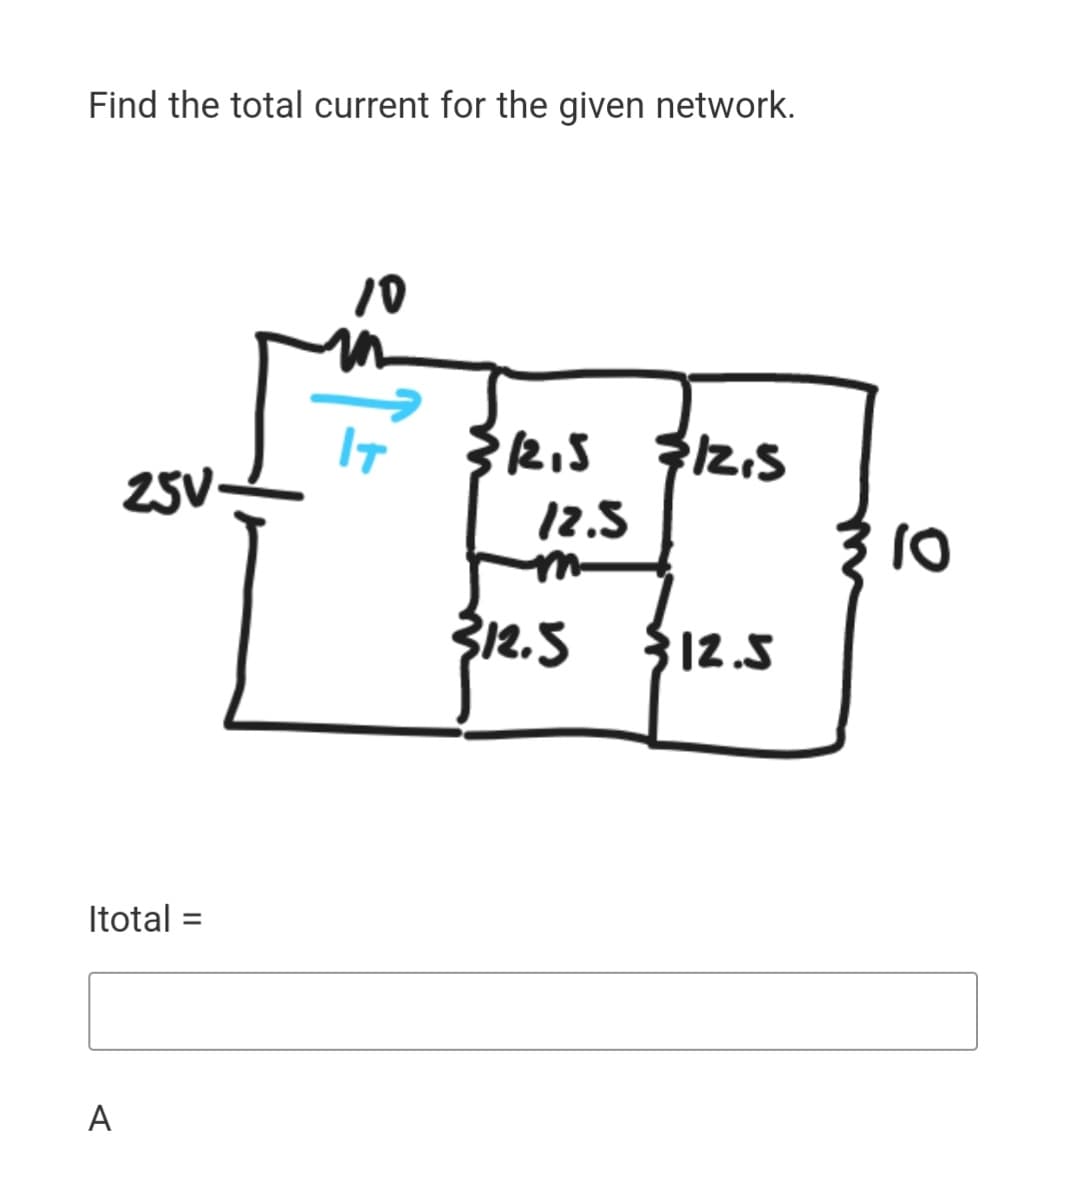 Find the total current for the given network.
25V-
12.5
312.5
S12.5
Itotal =
A
